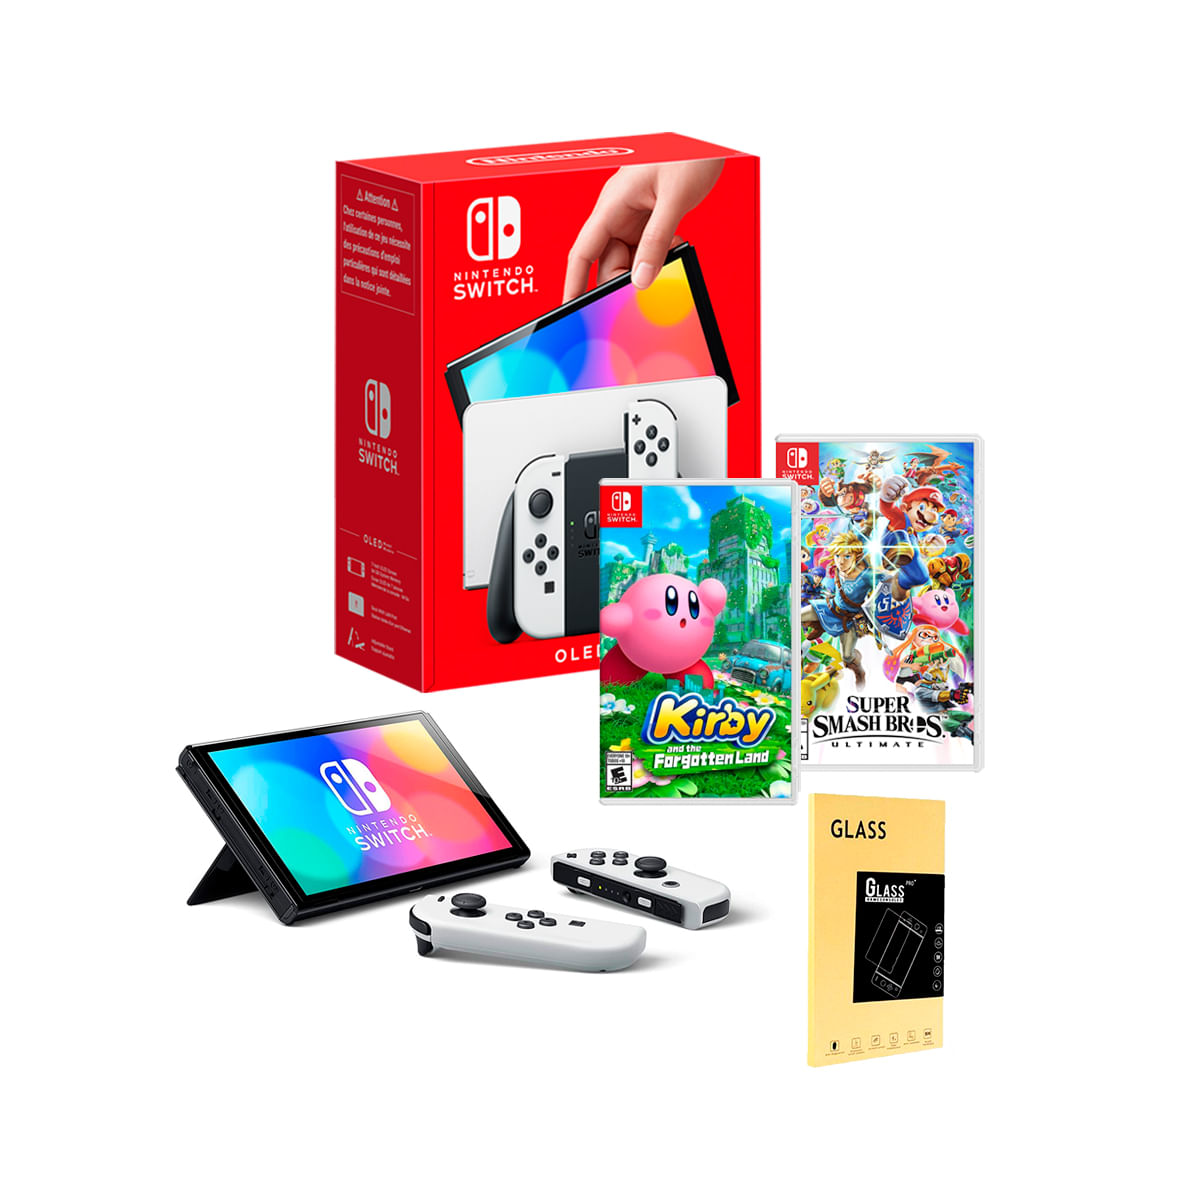 Consola Nintendo Switch Oled Blanco + Kirby and the Forgotten Land + Smash Bros + Mica